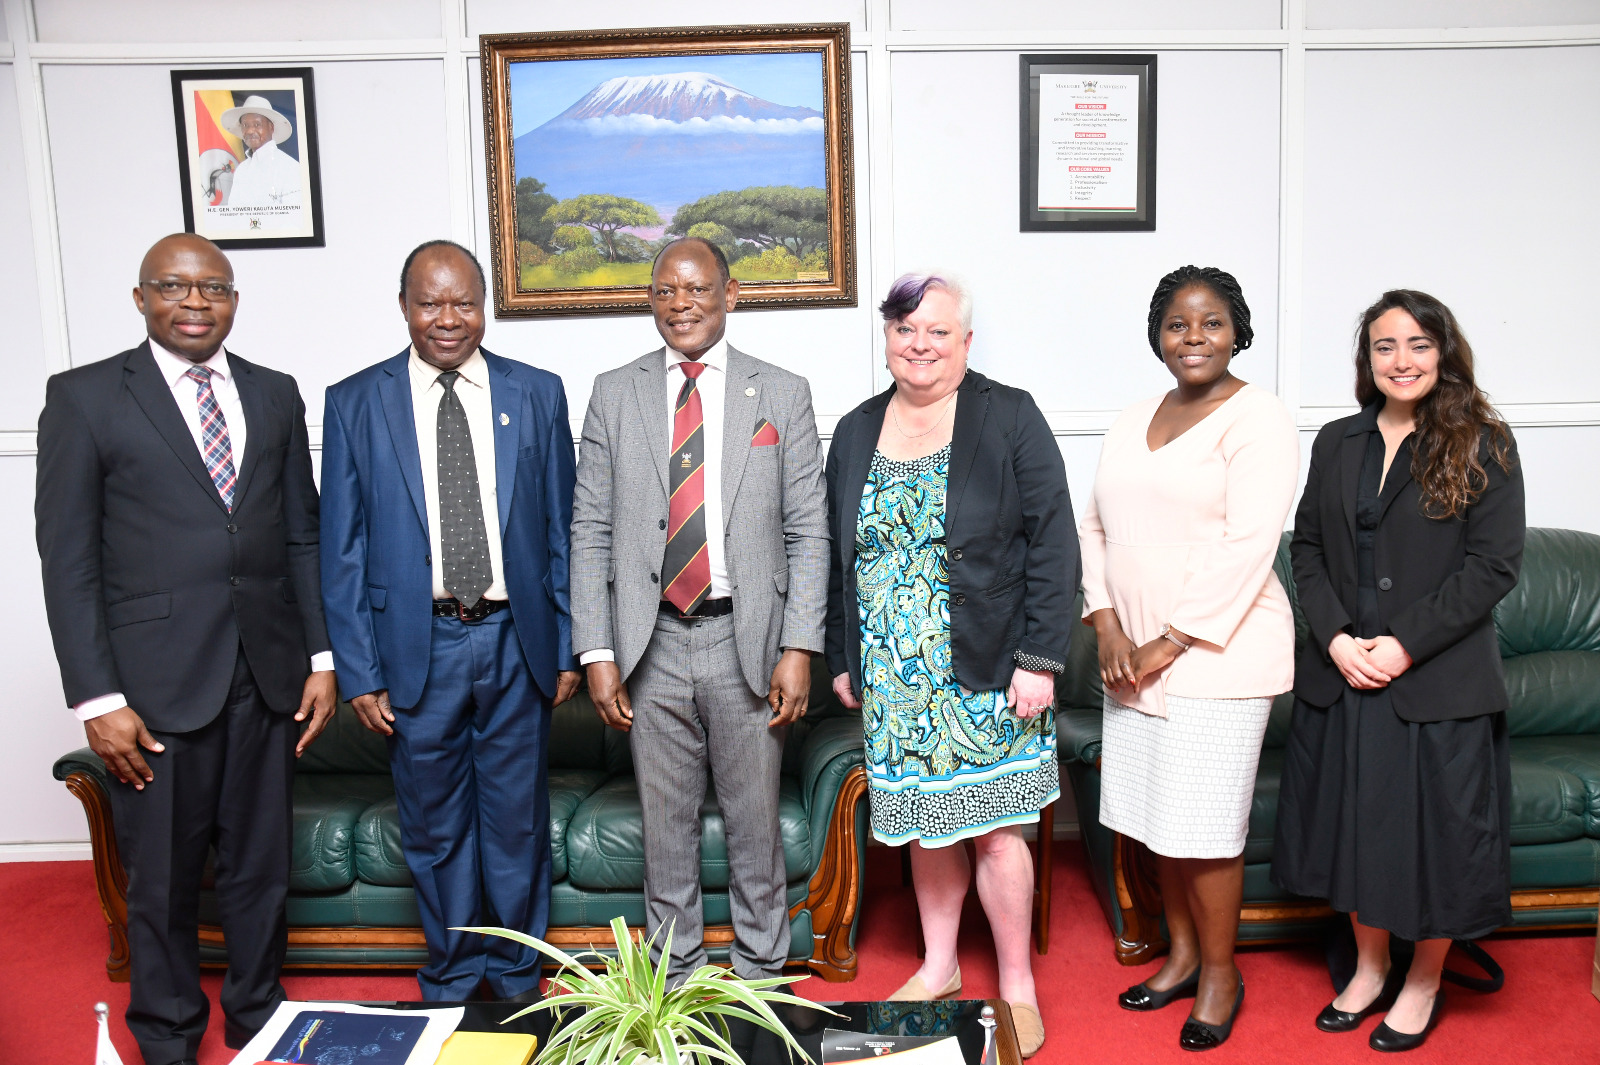 The Vice Chancellor, Prof. Barnabas Nawangwe (3rd L) with the project team, Prof. Trixie G. Smith (3rd R), Prof. Fredrick Muyodi (2nd L), Dr Grace Pregent (R), Prof. Ronald Bisaso (L), and Ms. Stella Kakeeto (2nd R) after the meeting on 20th March 2023, Frank Kalimuzo Central Teaching Facility, Makerere University.